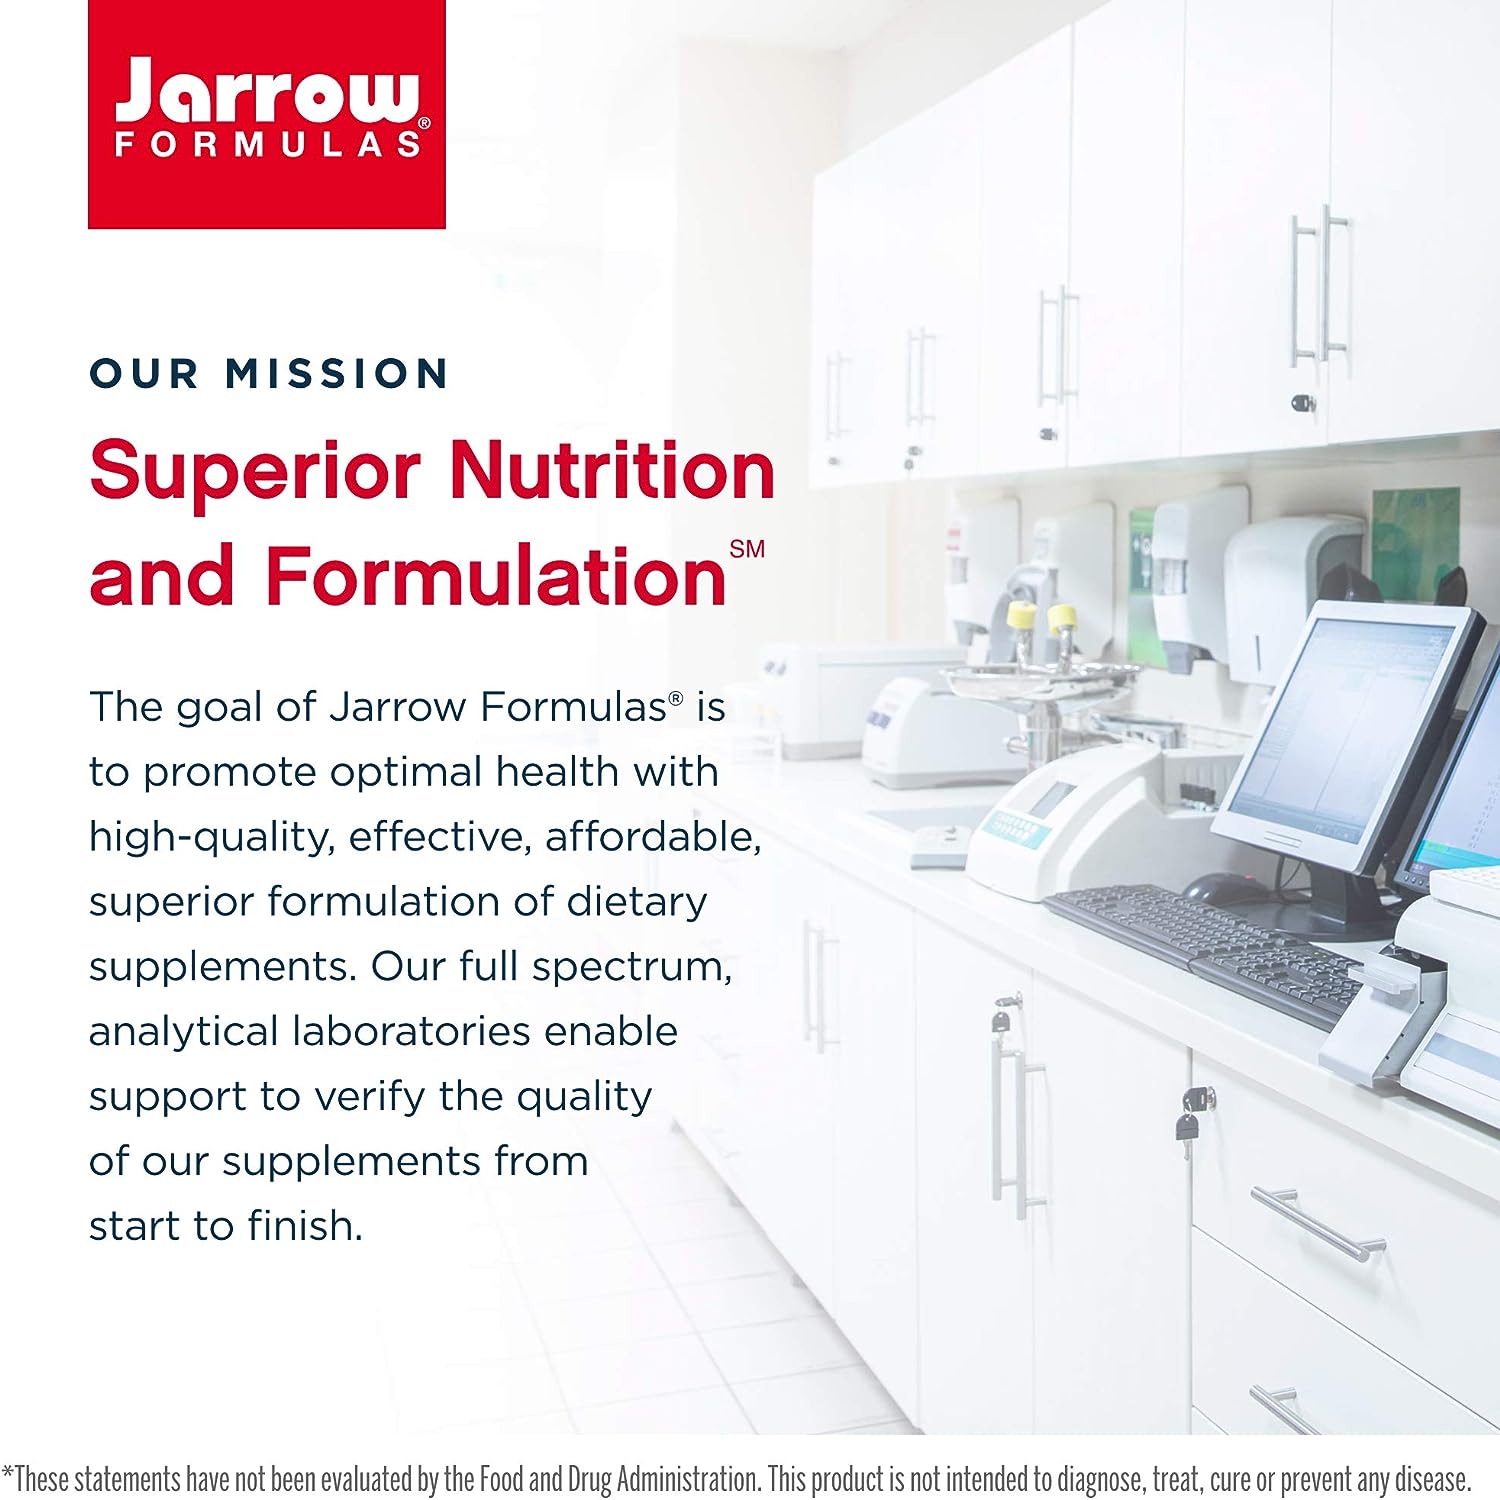 Jarrow Formulas Same 200 mg - 60 Tablets - Highest Concentration of Active S,S Form - Supports Joint Health, Liver Function, Brain Metabolism, Mood  Antioxidant Defense - 60 Servings : Health  Household